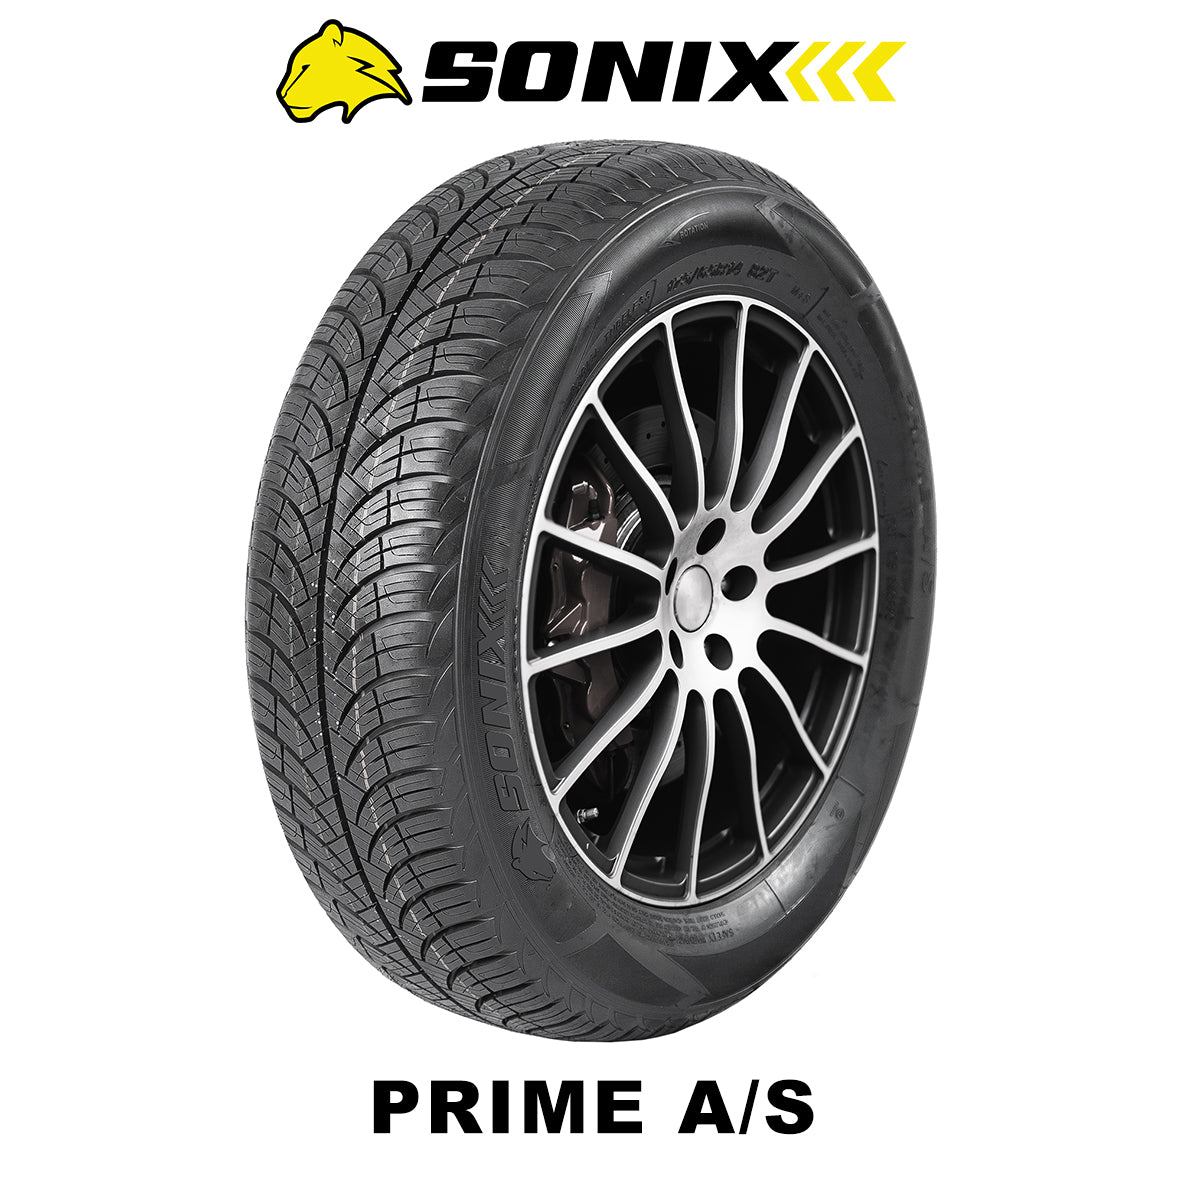 225/55R19 99V SONIX PRIME A/S ALL-WEATHER TIRES (M+S + SNOWFLAKE)